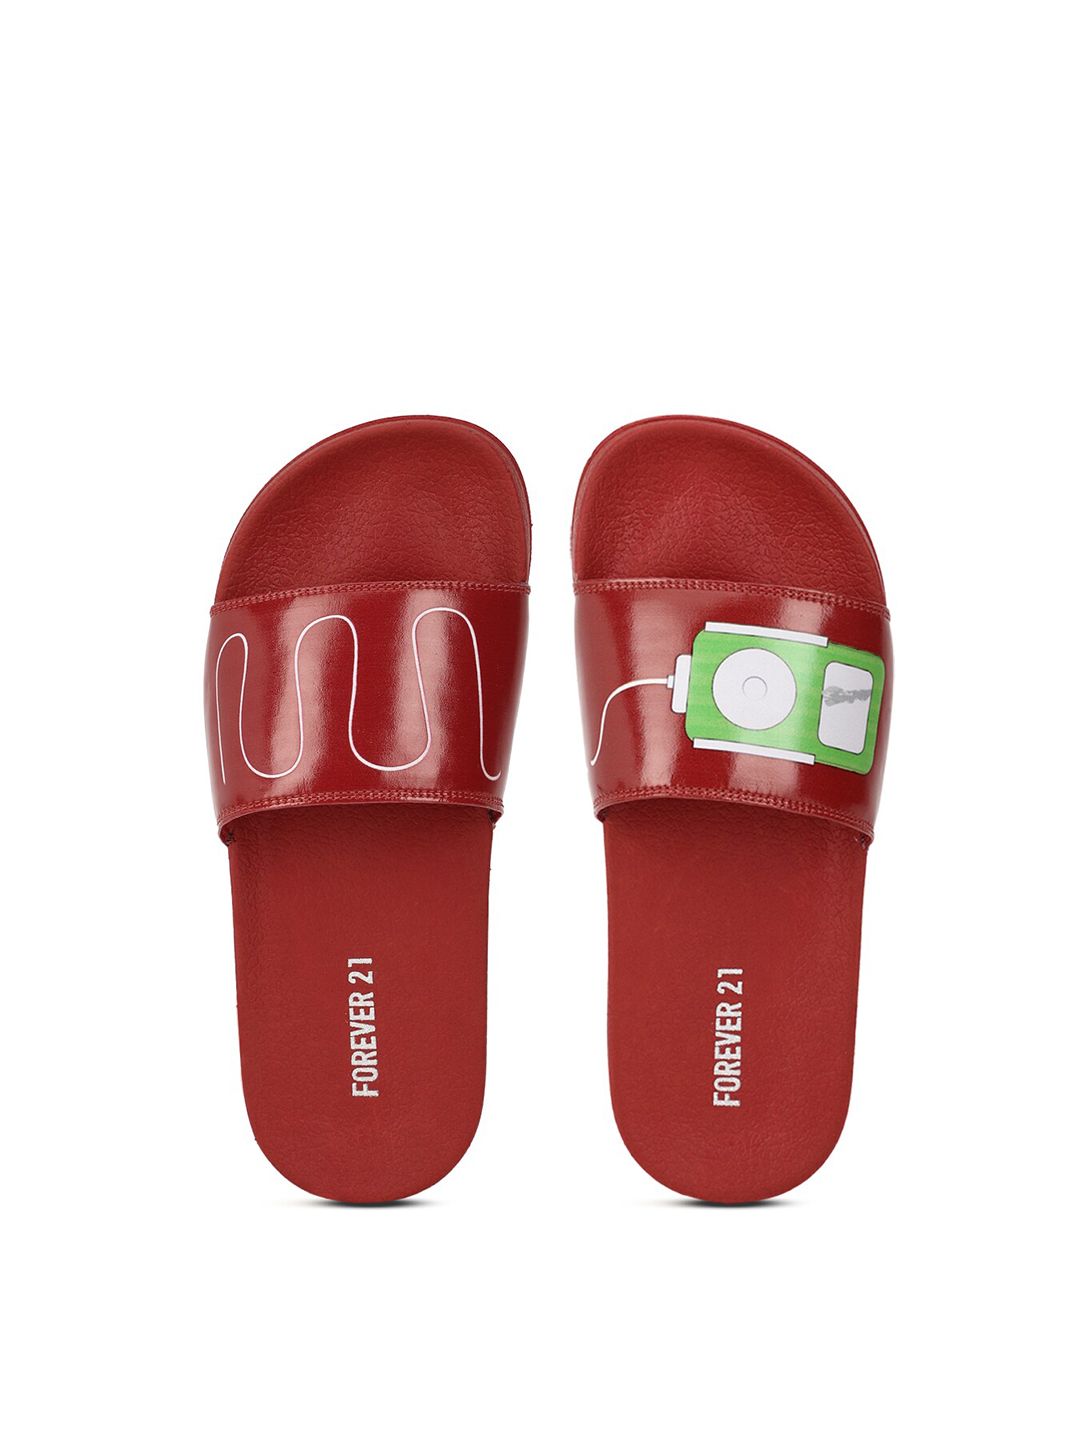 FOREVER 21 Women Red & Green Printed Sliders Price in India